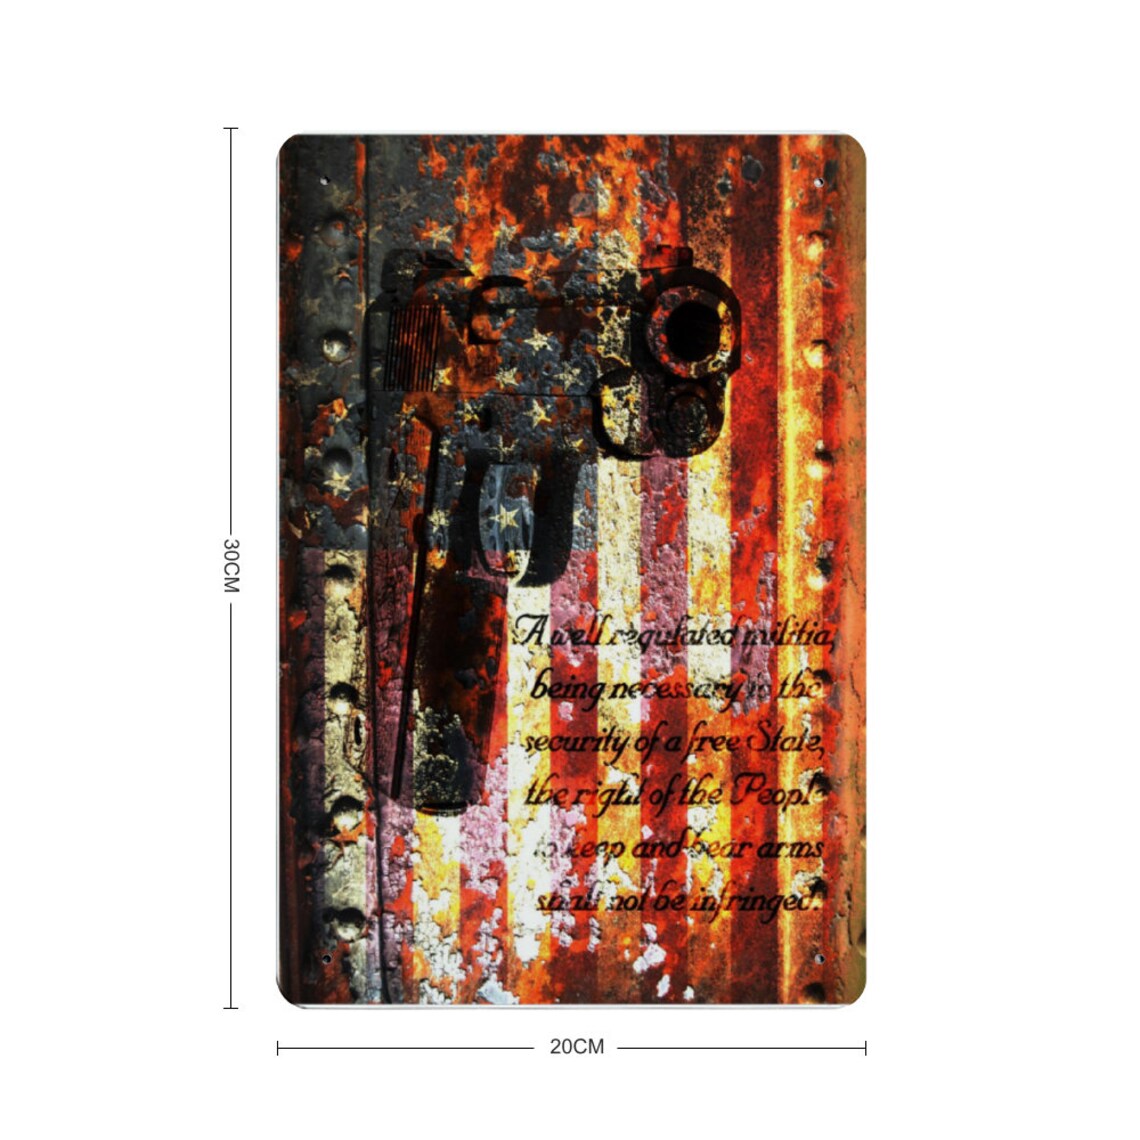 M1911 Pistol and 2nd Amendment on Rusted American Flag Print on Metal with dimensions